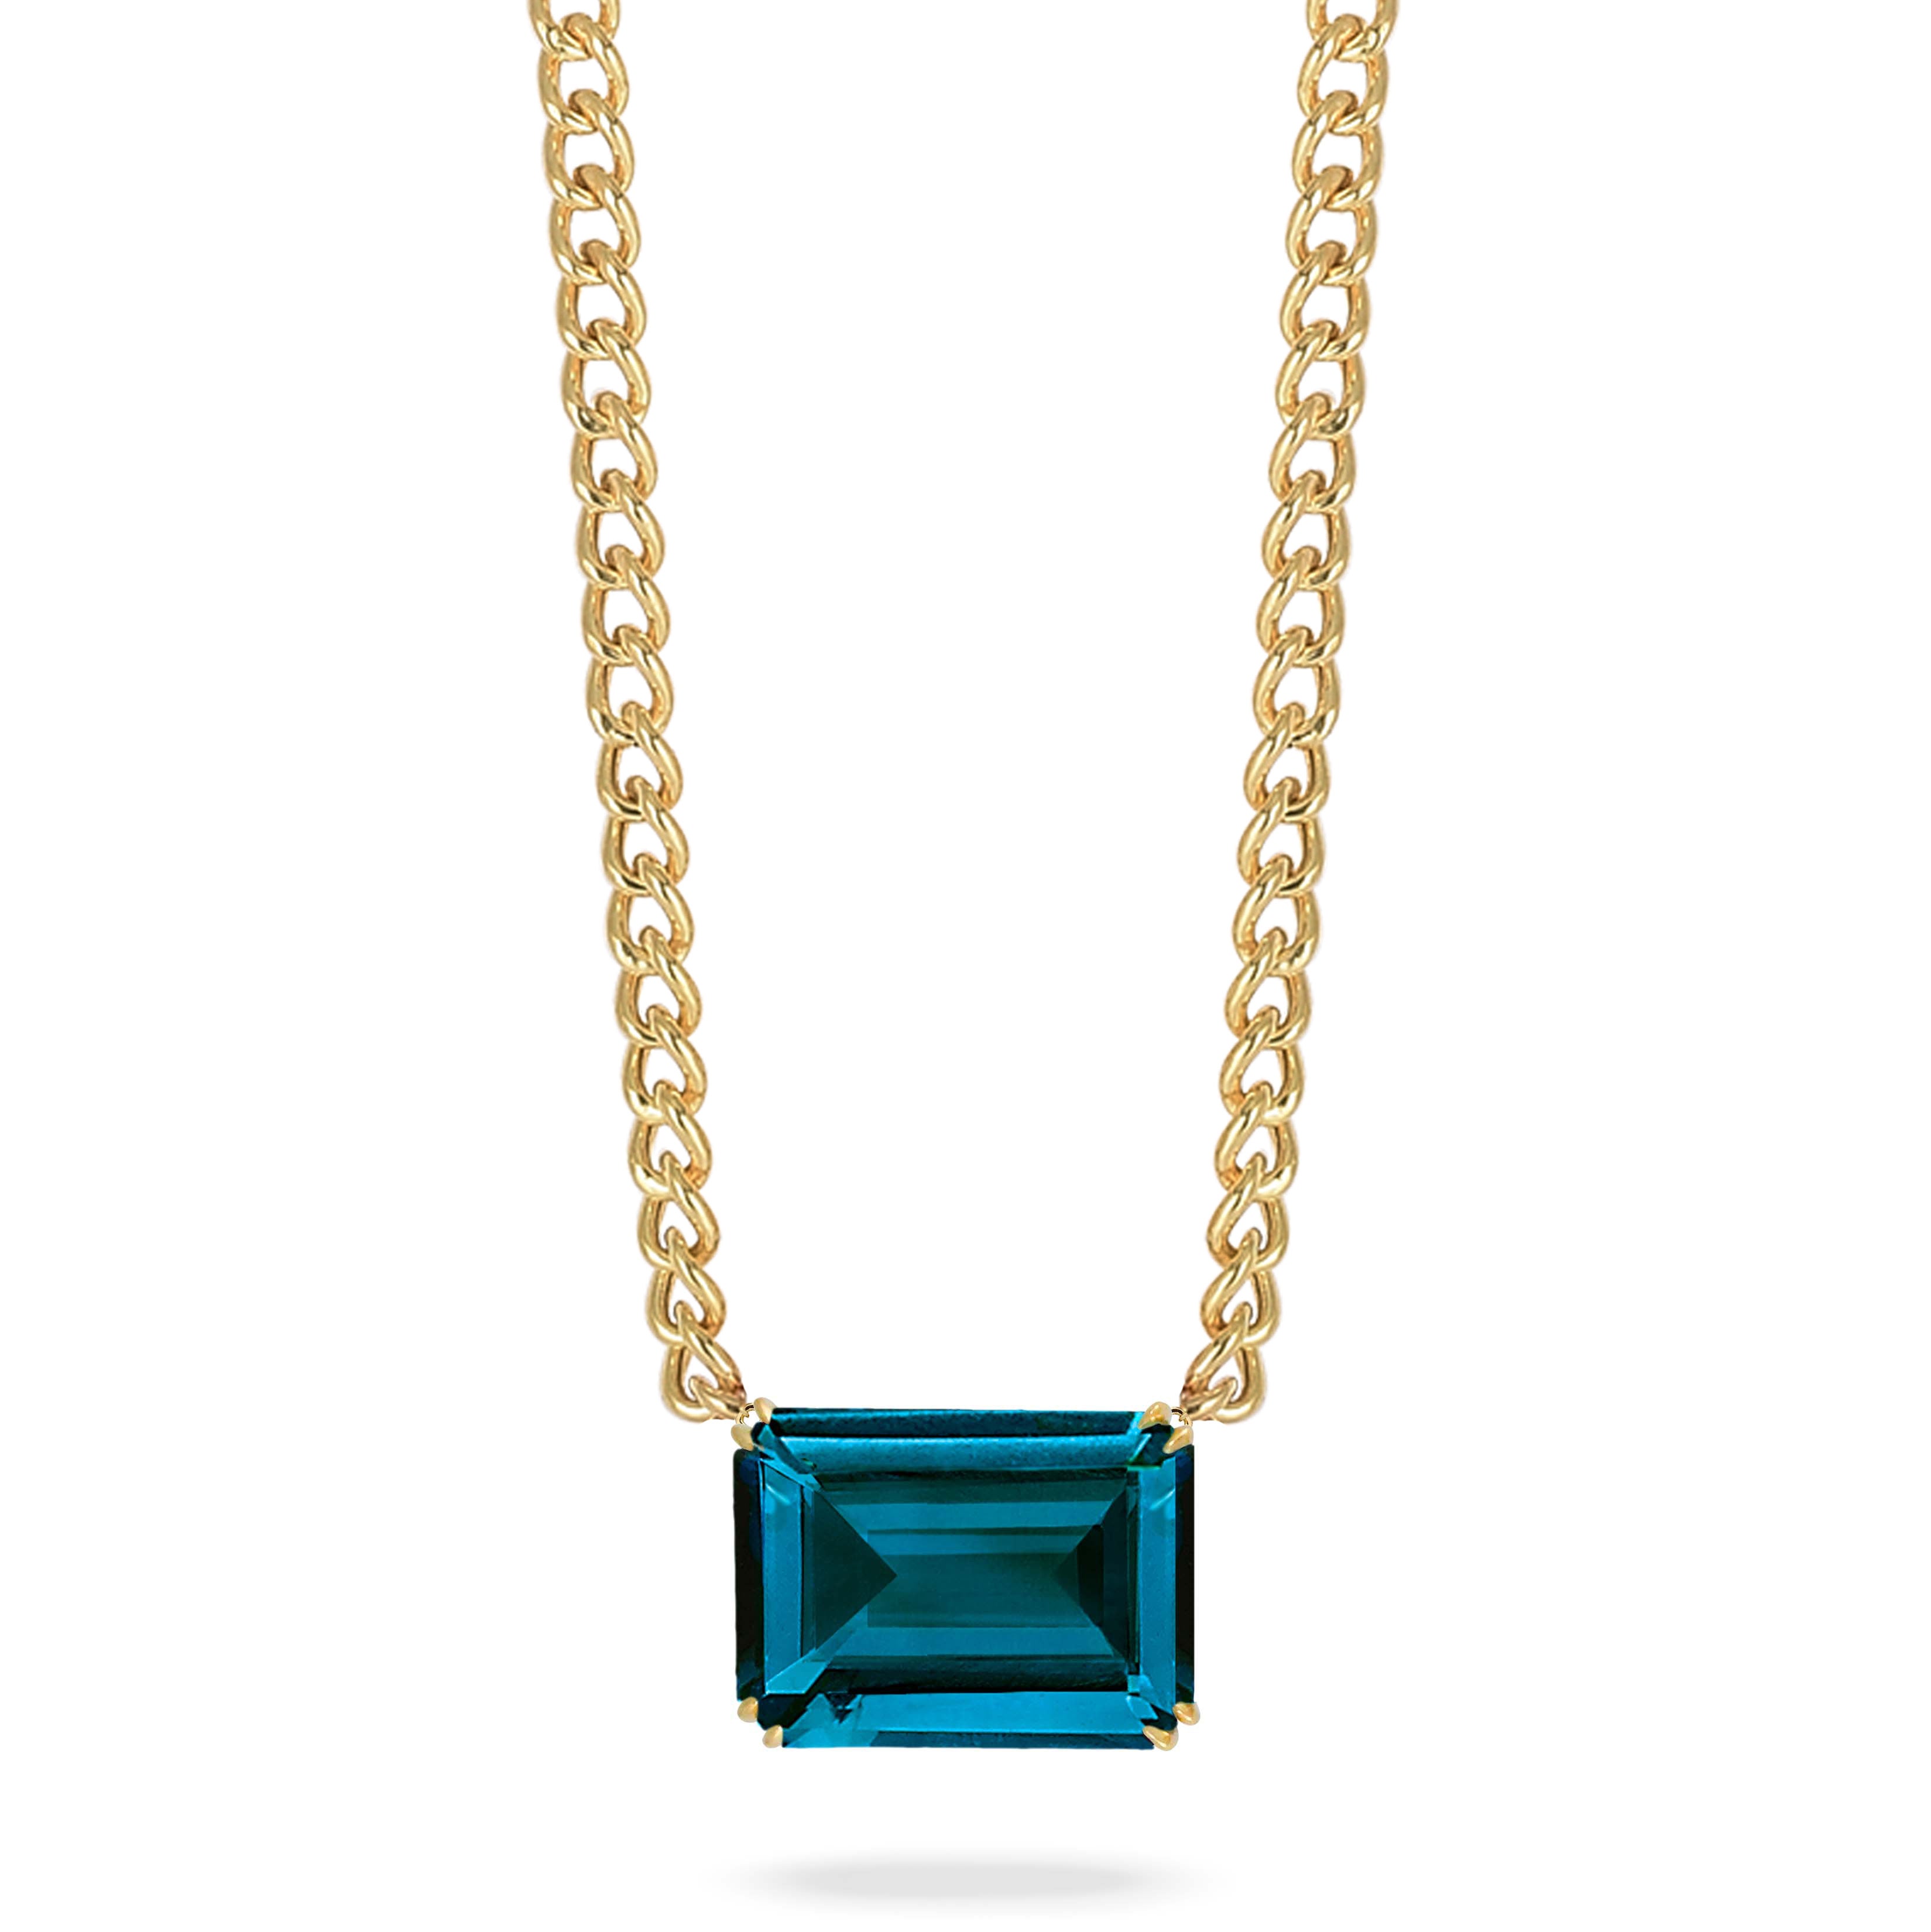 18K YELLOW GOLD NECKLACE WITH LONDON BLUE TOPAZ ON A SMALL CUBAN CHAIN